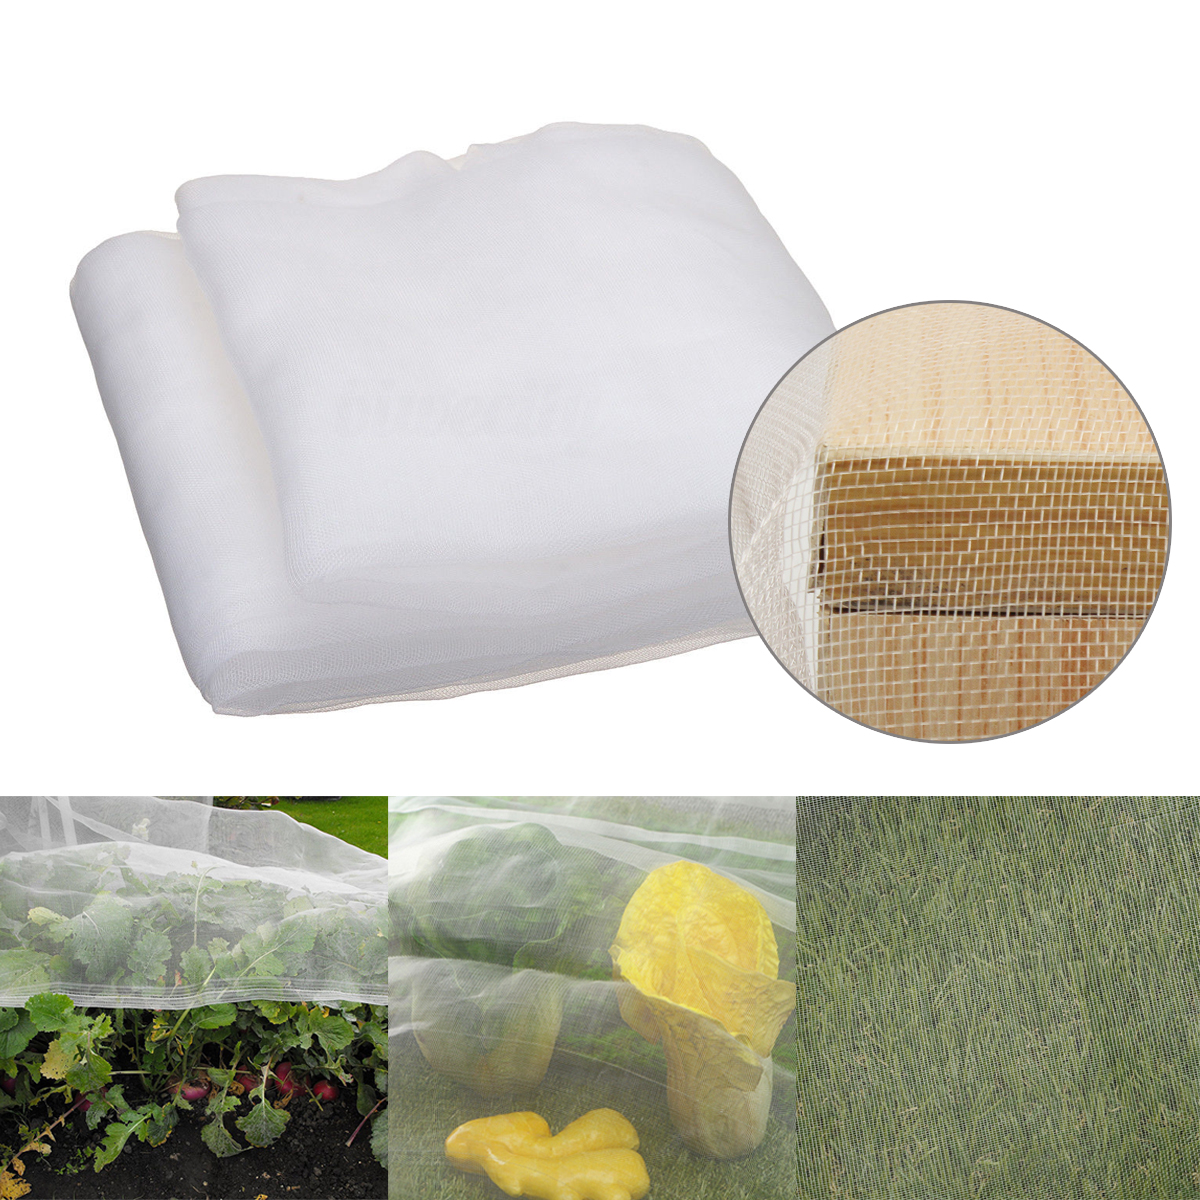 3x25m-White-Garden-Net-Mosquito-Net-Bug-Insect-Hunting-Barrier-Garden-Protective-Netting-1454943-6